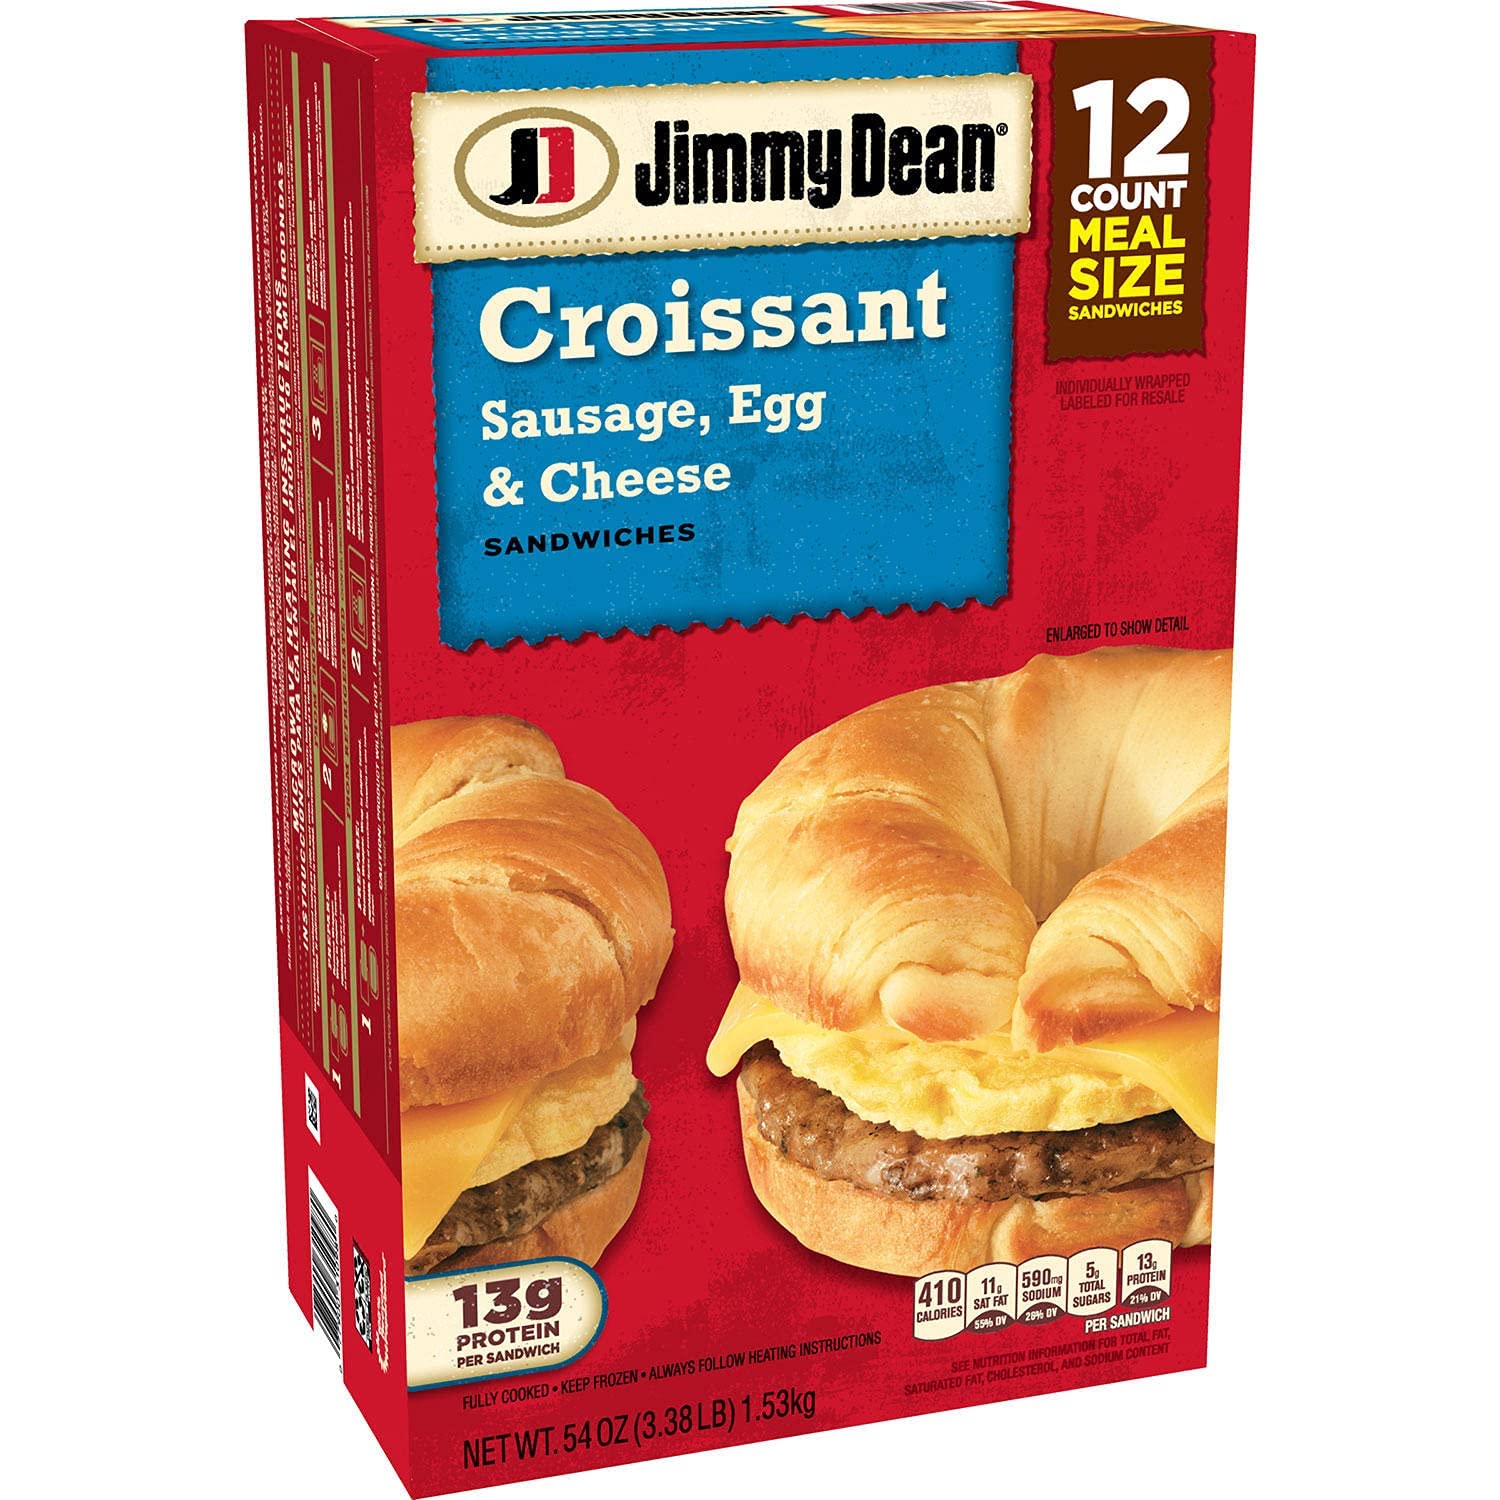 Jimmy Dean Croissant Sausage, Egg and Cheese - Frozen Sandwiches - Breakfast On-the-Go